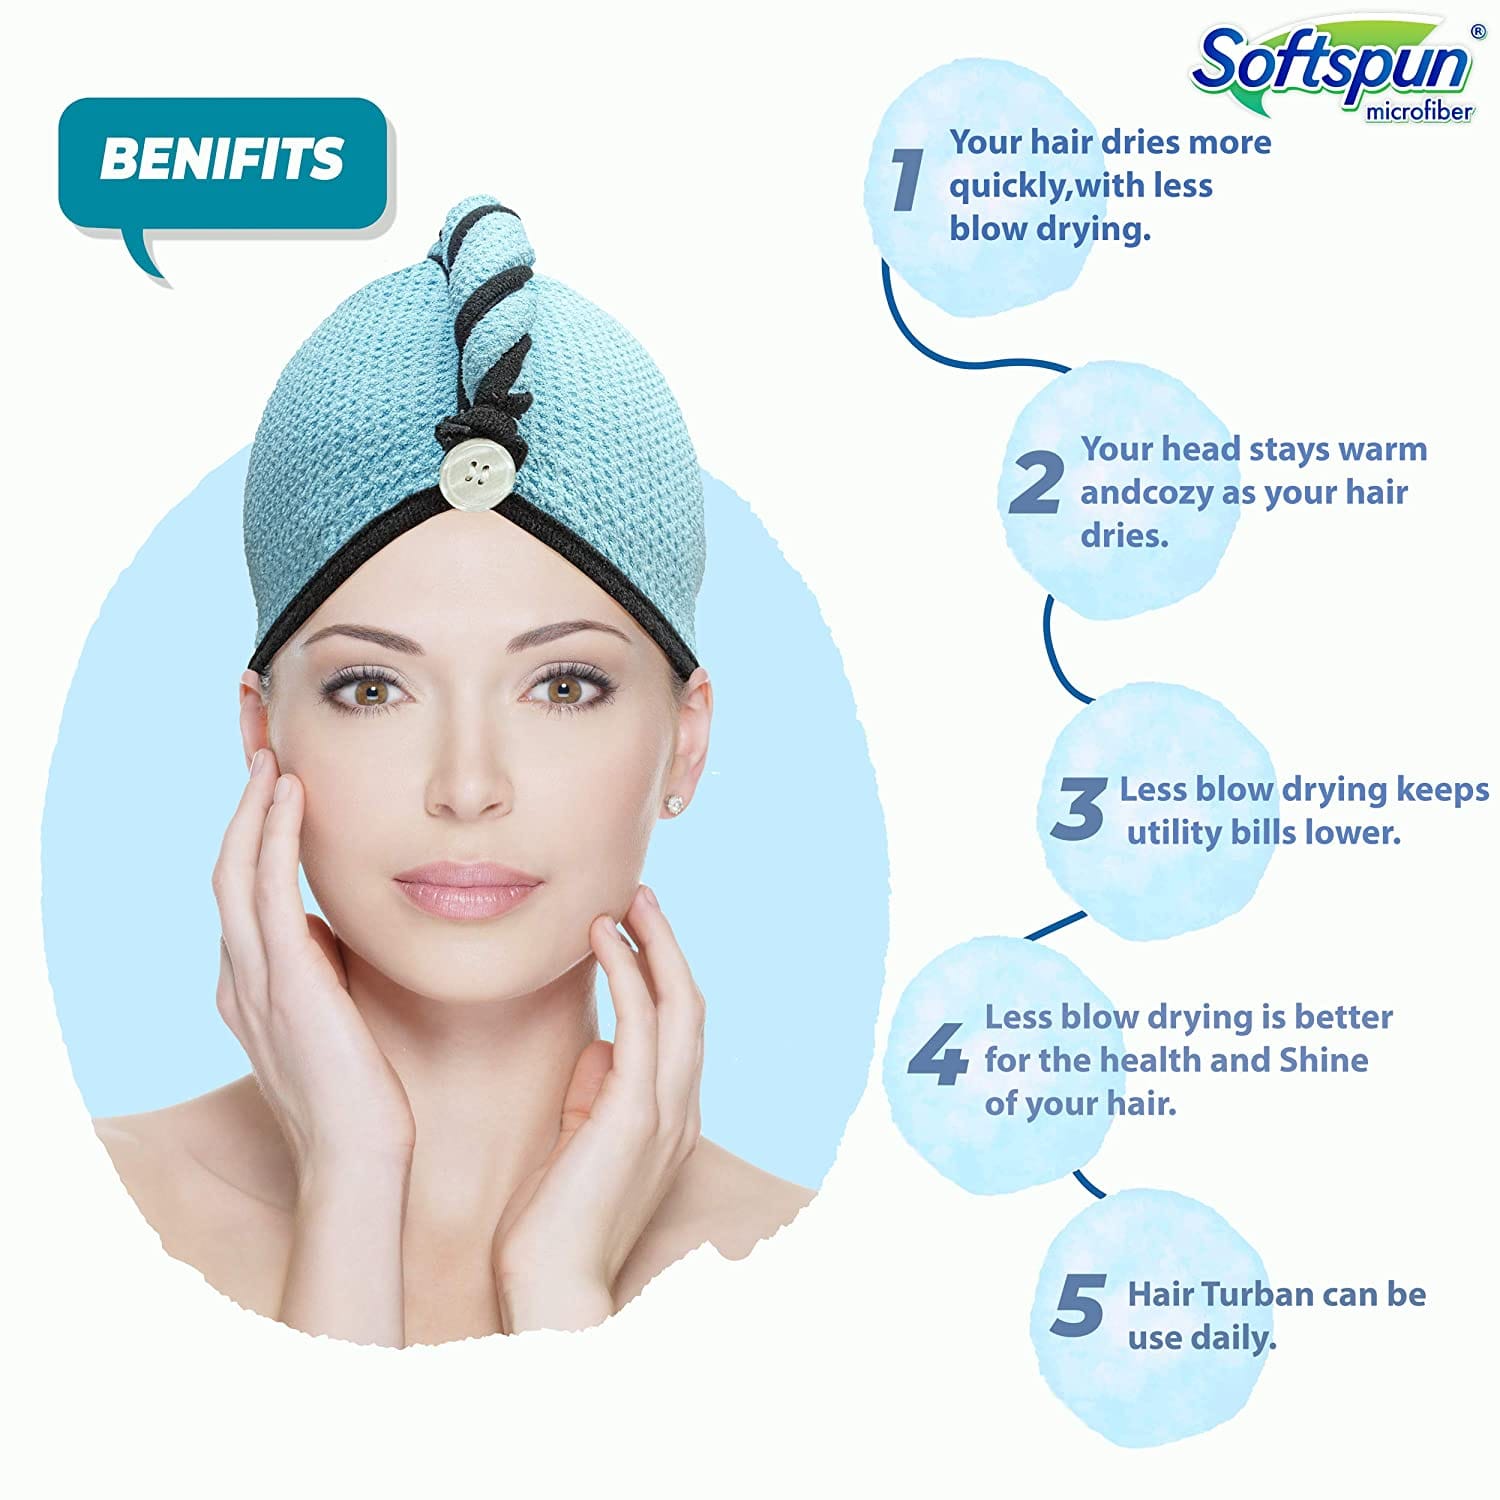 SOFTSPUN Microfiber Hair Cap Silk Banded Edge 1, Pcs -70X25cm, Super Absorbent Quick Dry Hair Turban for Drying All kinds of Hair - Straight or Curly short or Long Thin or Thick Hair.